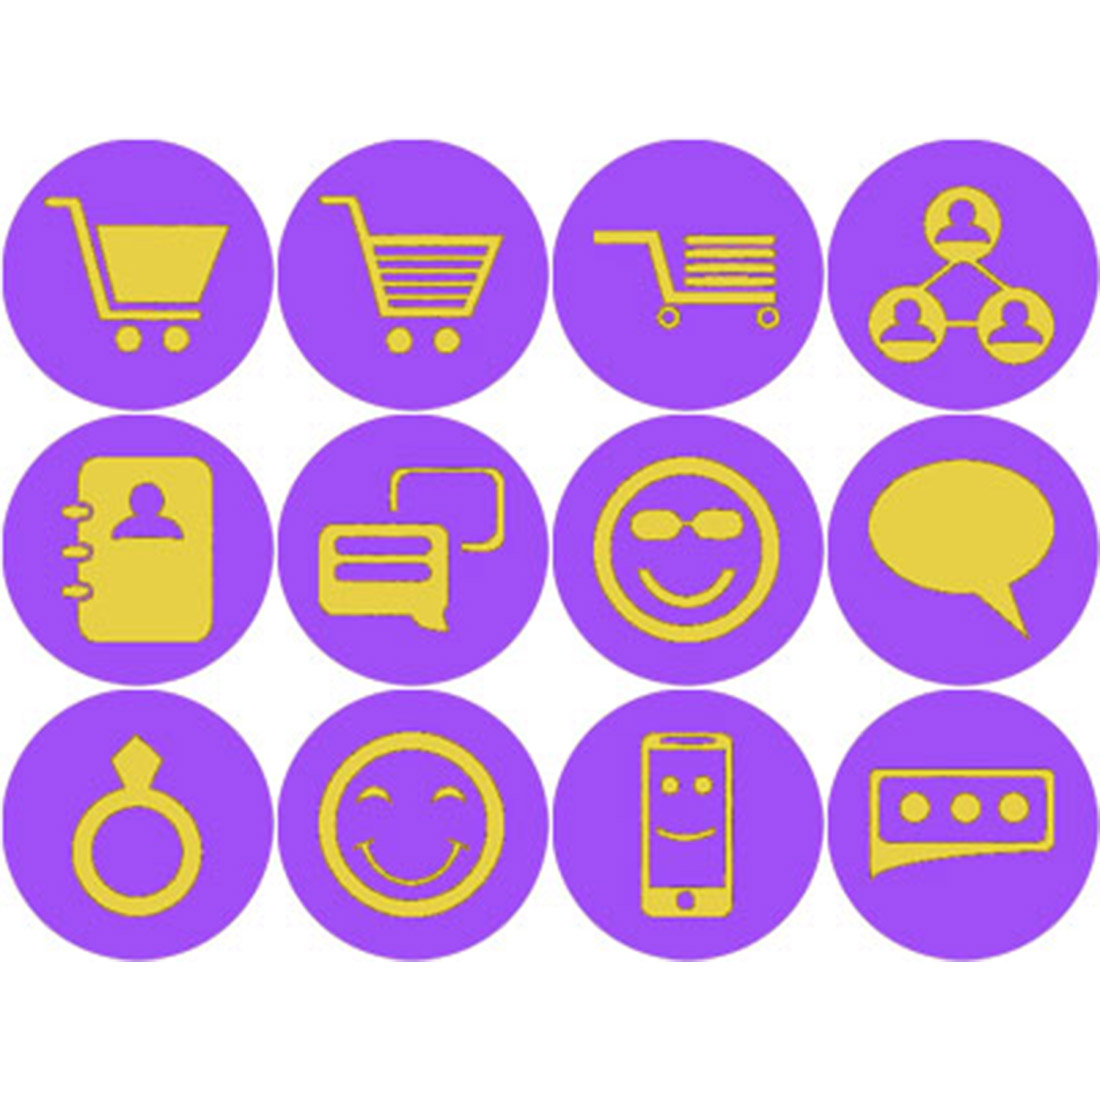 ELECTRIC PURPLE AND YELLOW COMMERCE ICONS cover image.